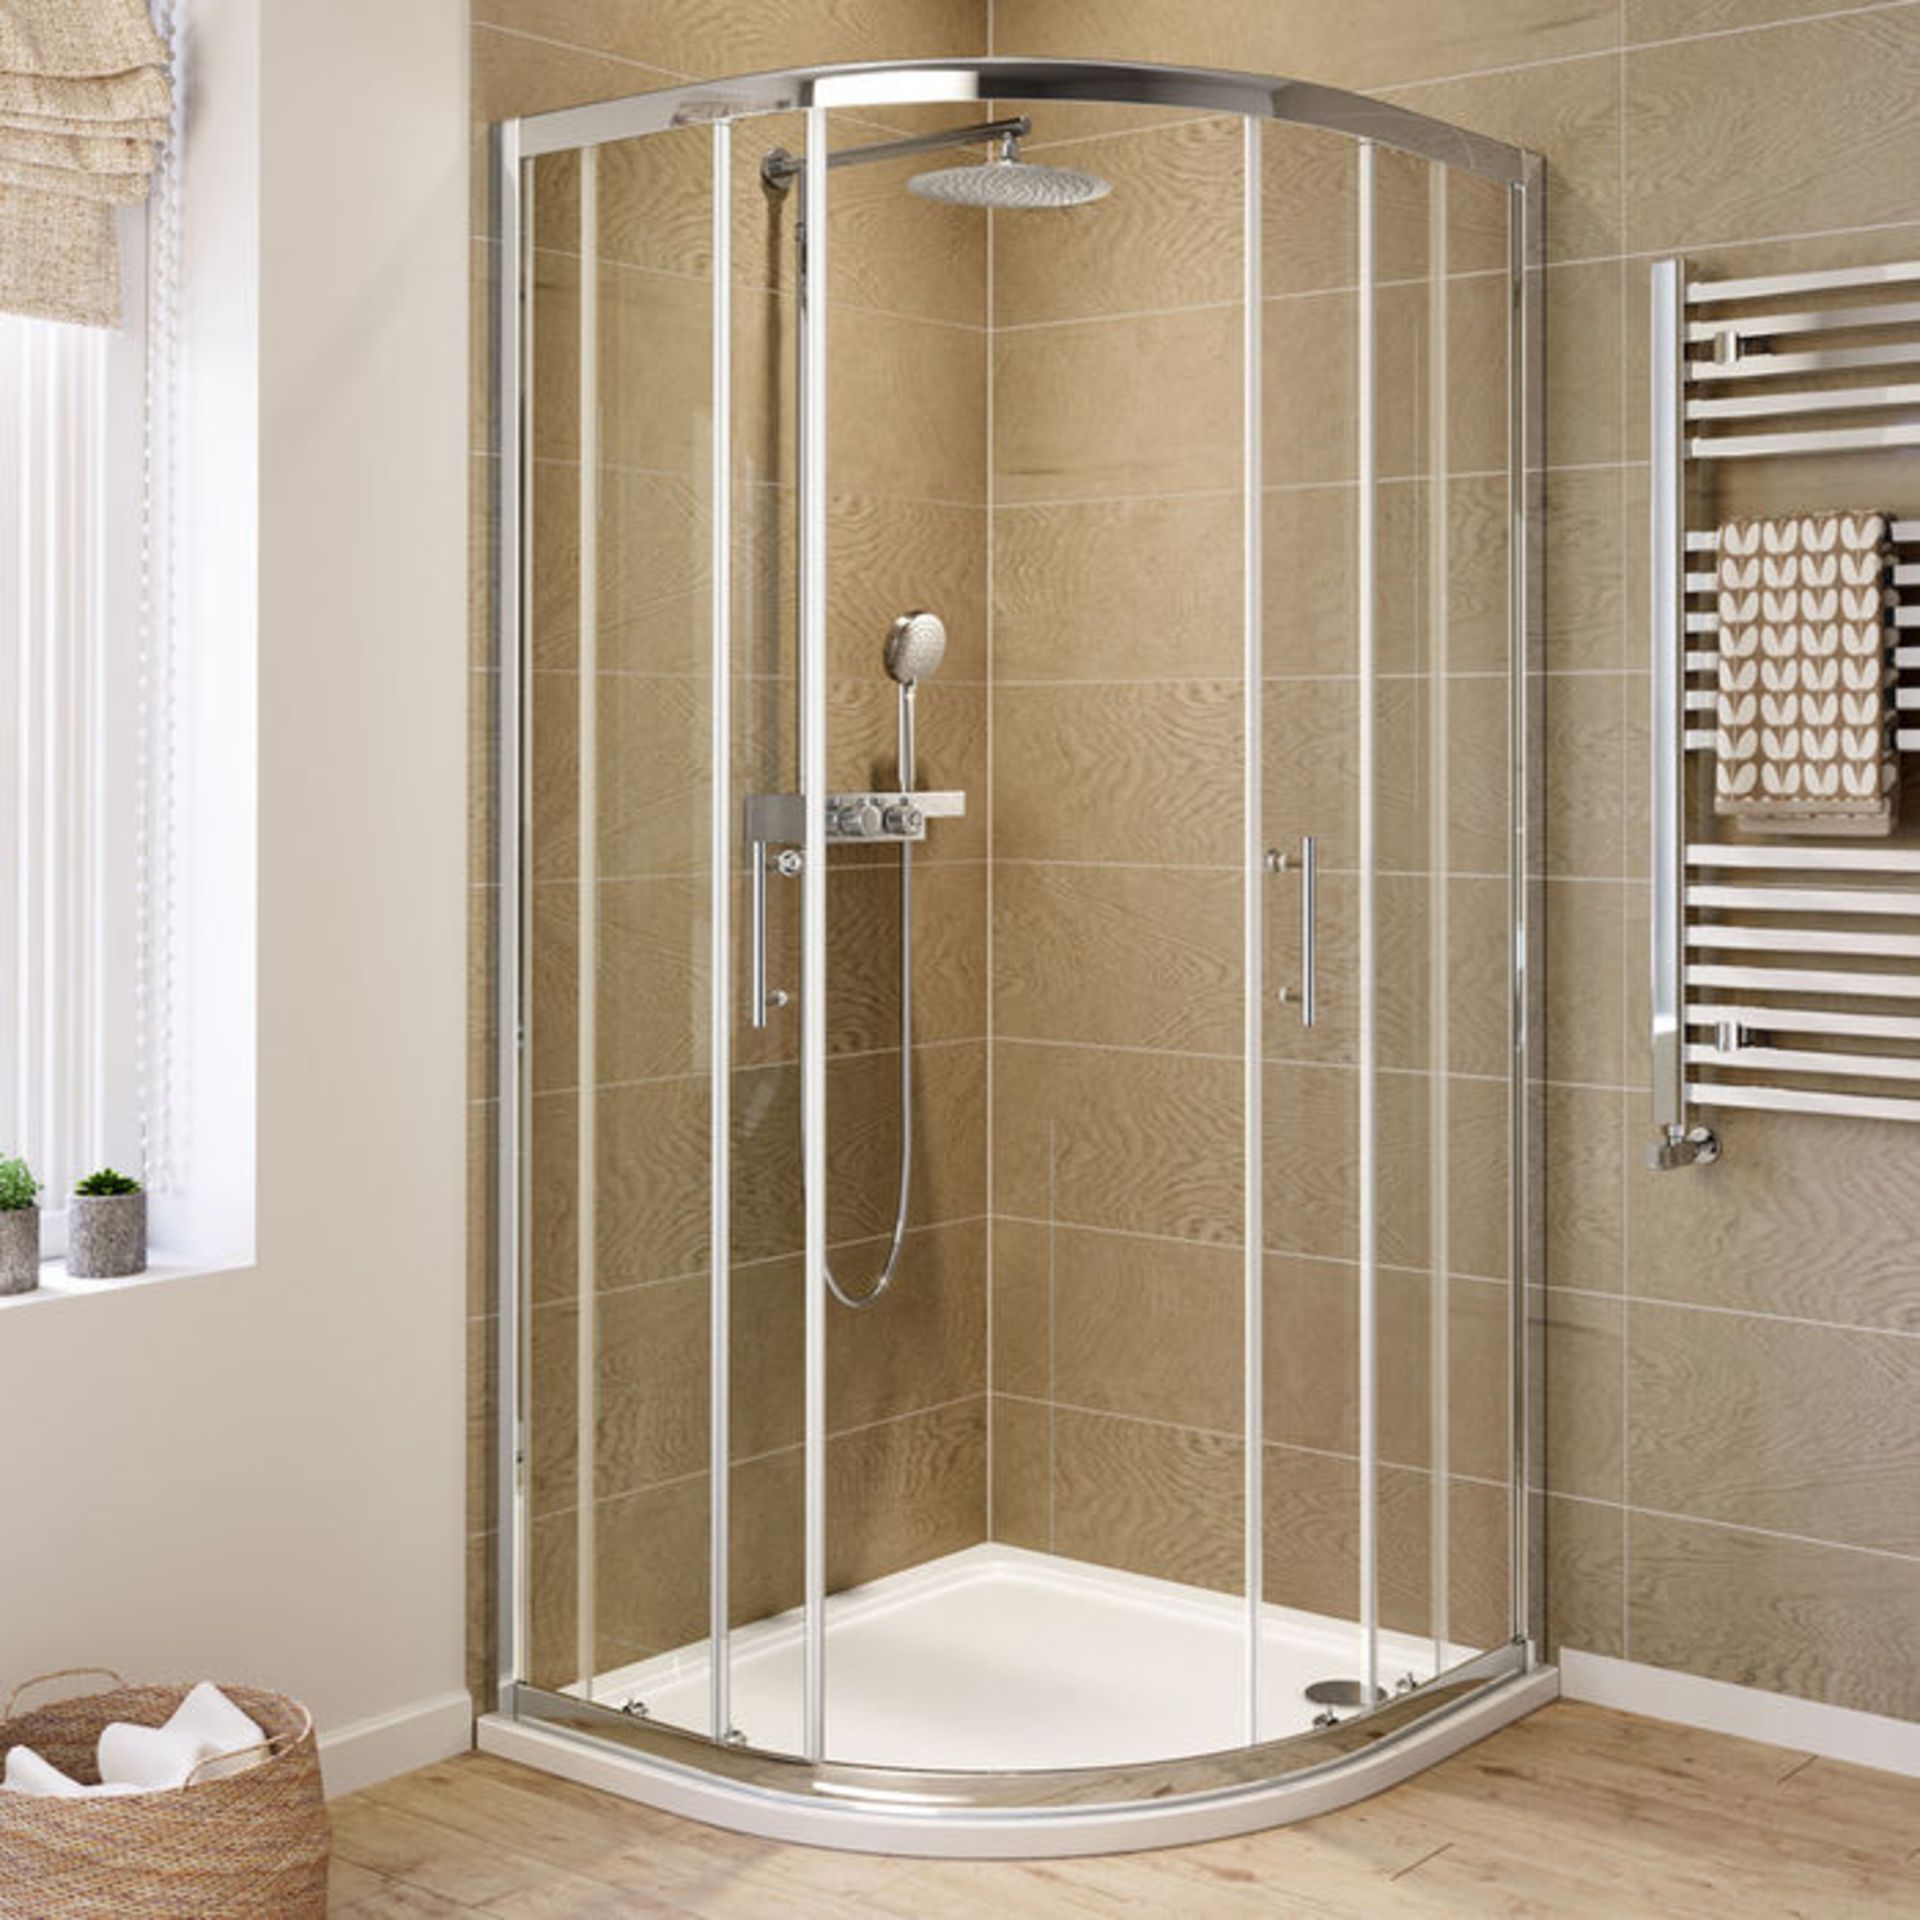 (P28) 900x900mm - 6mm - Elements Quadrant Shower Enclosure. RRP £229.99. 6mm Safety Glass Fully